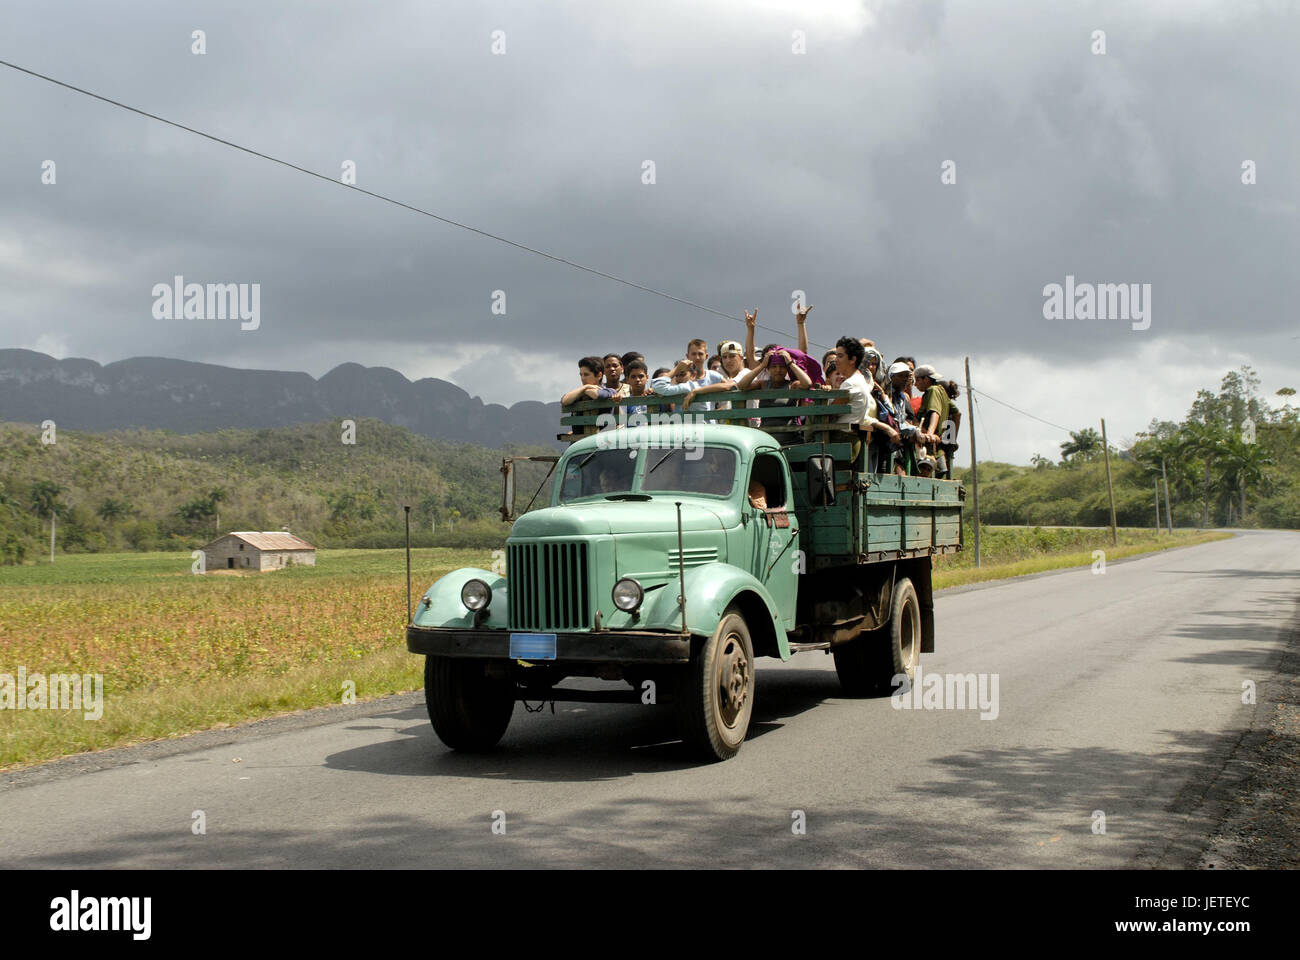 Cuba, Vinales, street, truck, loading area, crowd of people, the Caribbean, island, street, traffic, vehicle, truck, tourist, schoolboy, person, transport, promotion, transportation of human beings, typically for country, means of transportation, outside, destination, tourism, Stock Photo